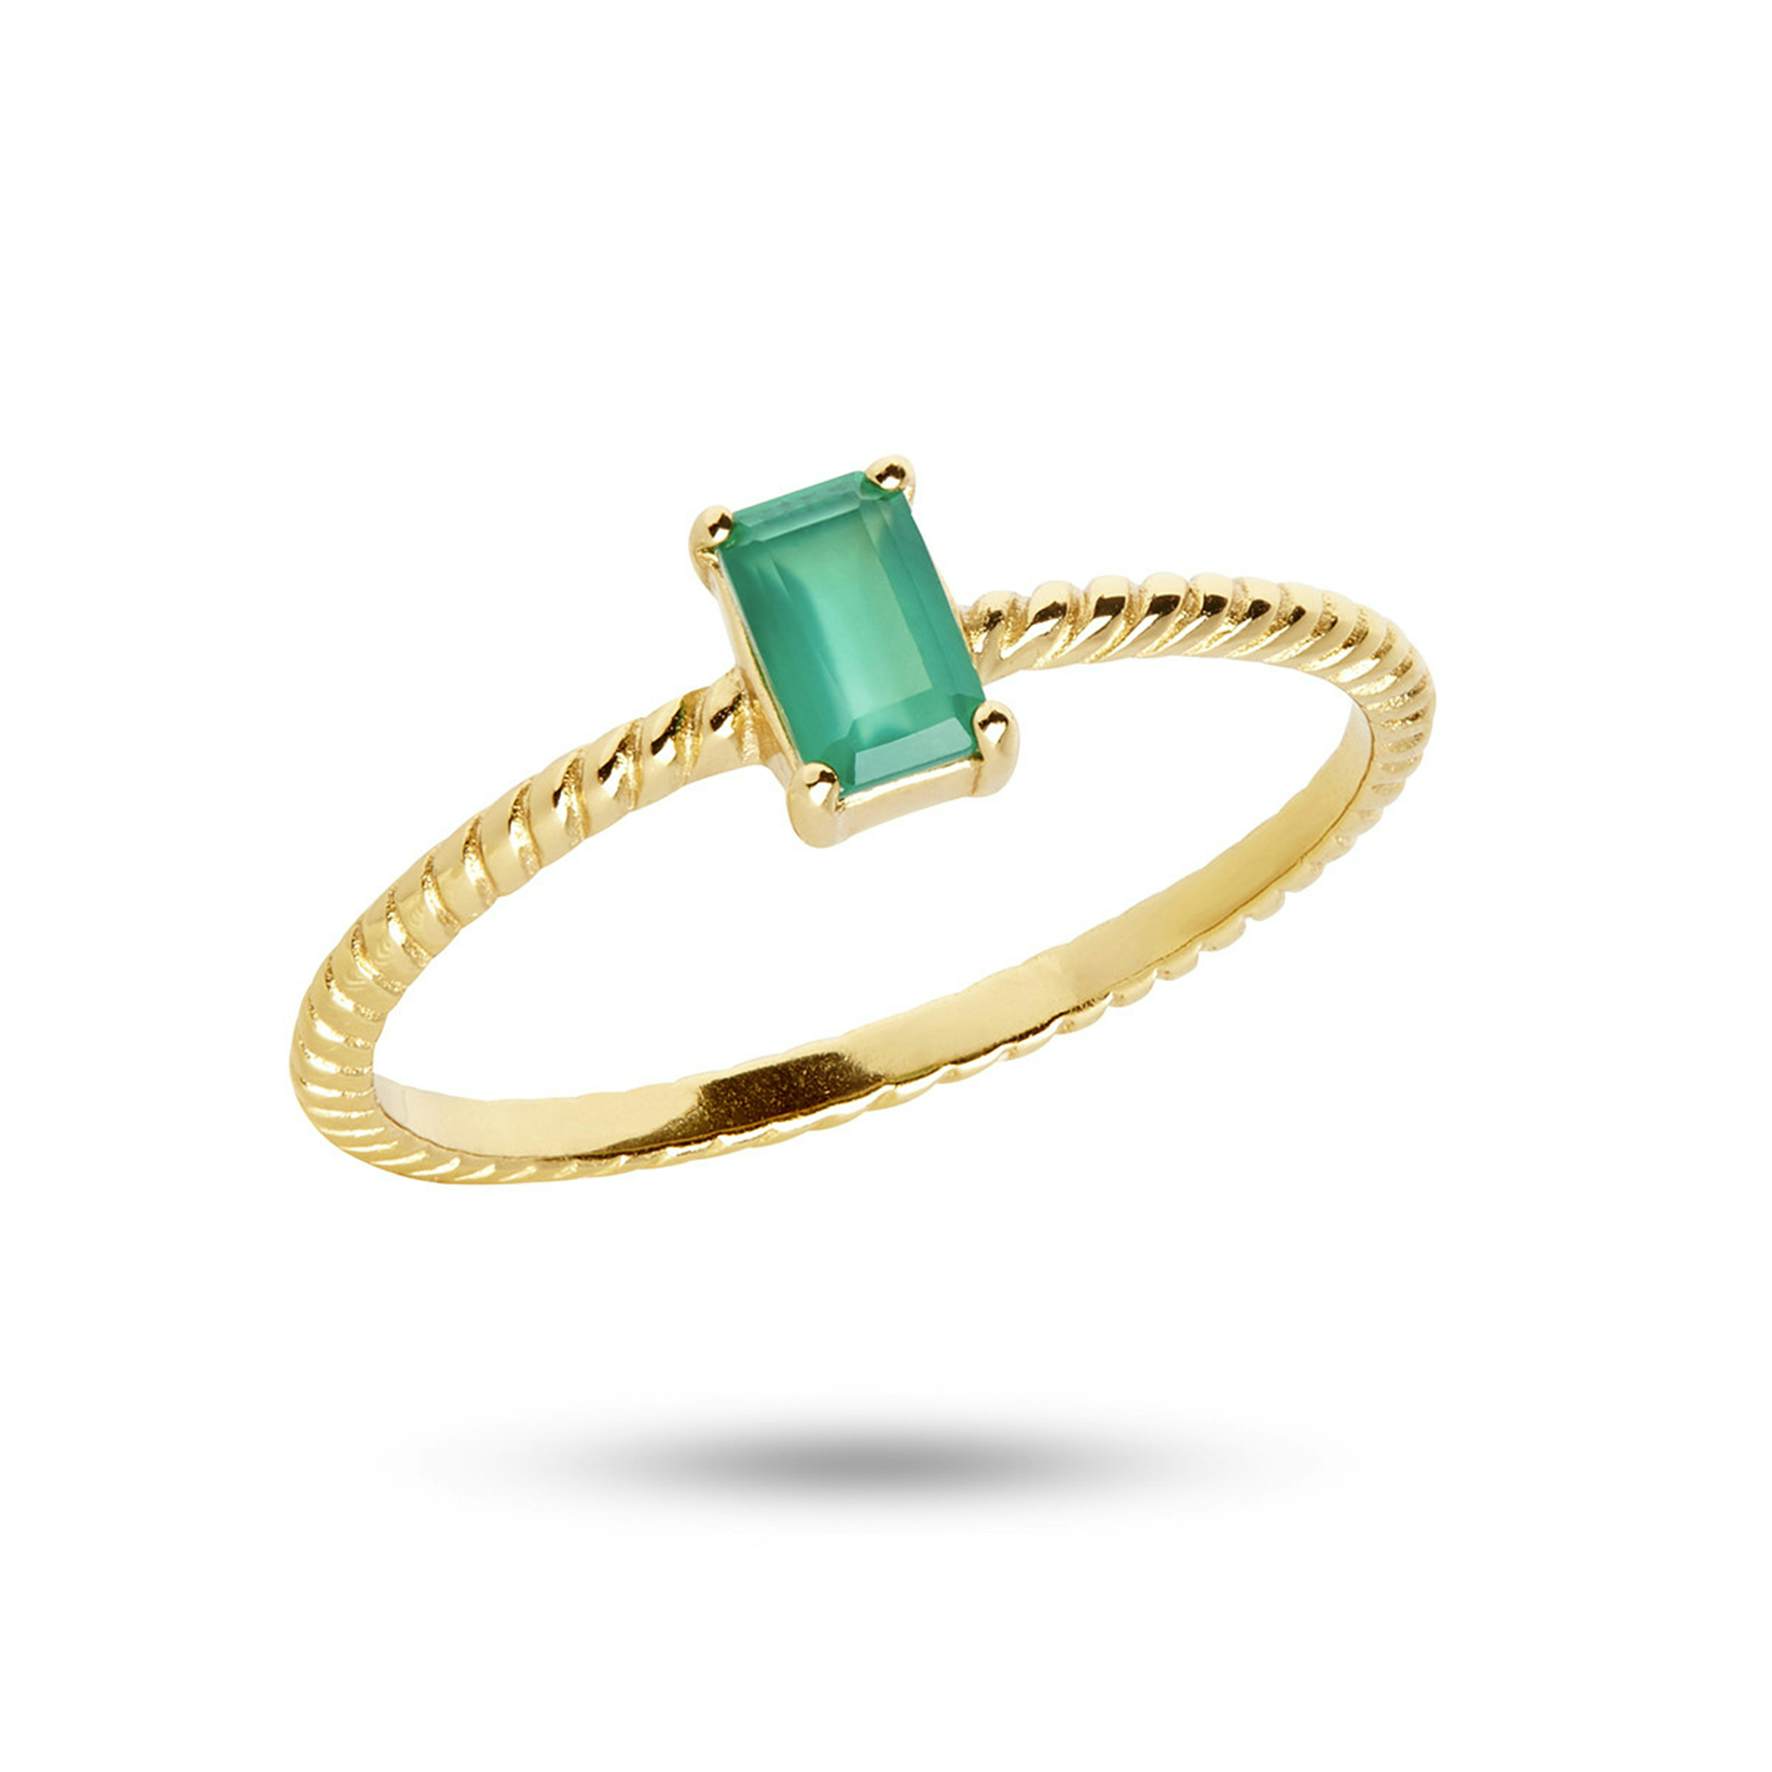 Gem Candy Ring Confidence from Carré in Goldplated-Silver Sterling 925|Green Agat